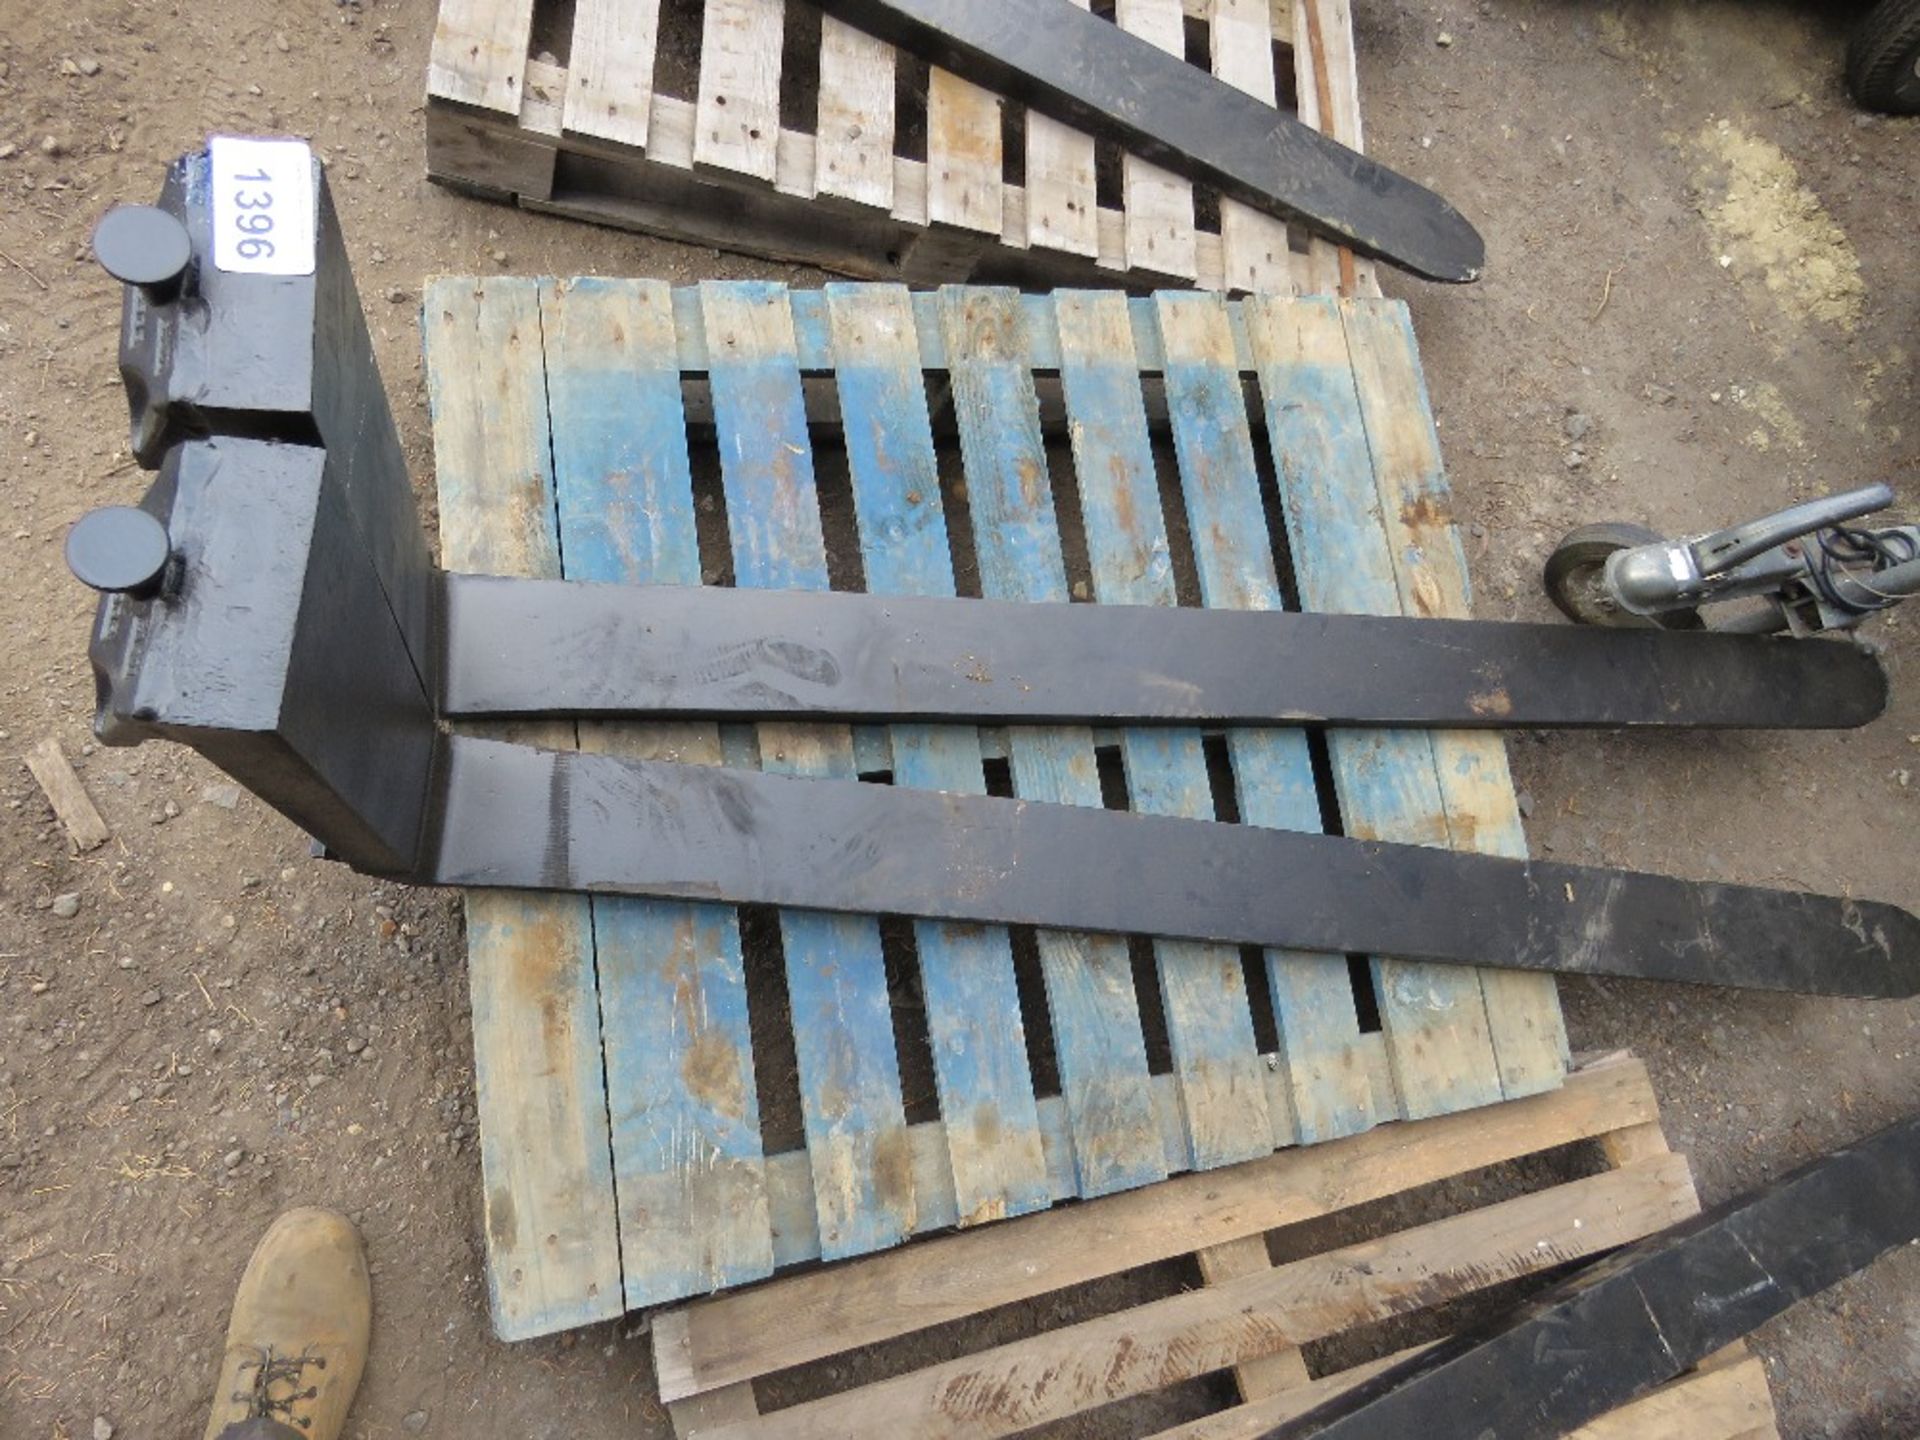 PAIR OF USED FORKLIFT TINES, 20" CARRIAGE, 1.8M LENGTH APPROX.